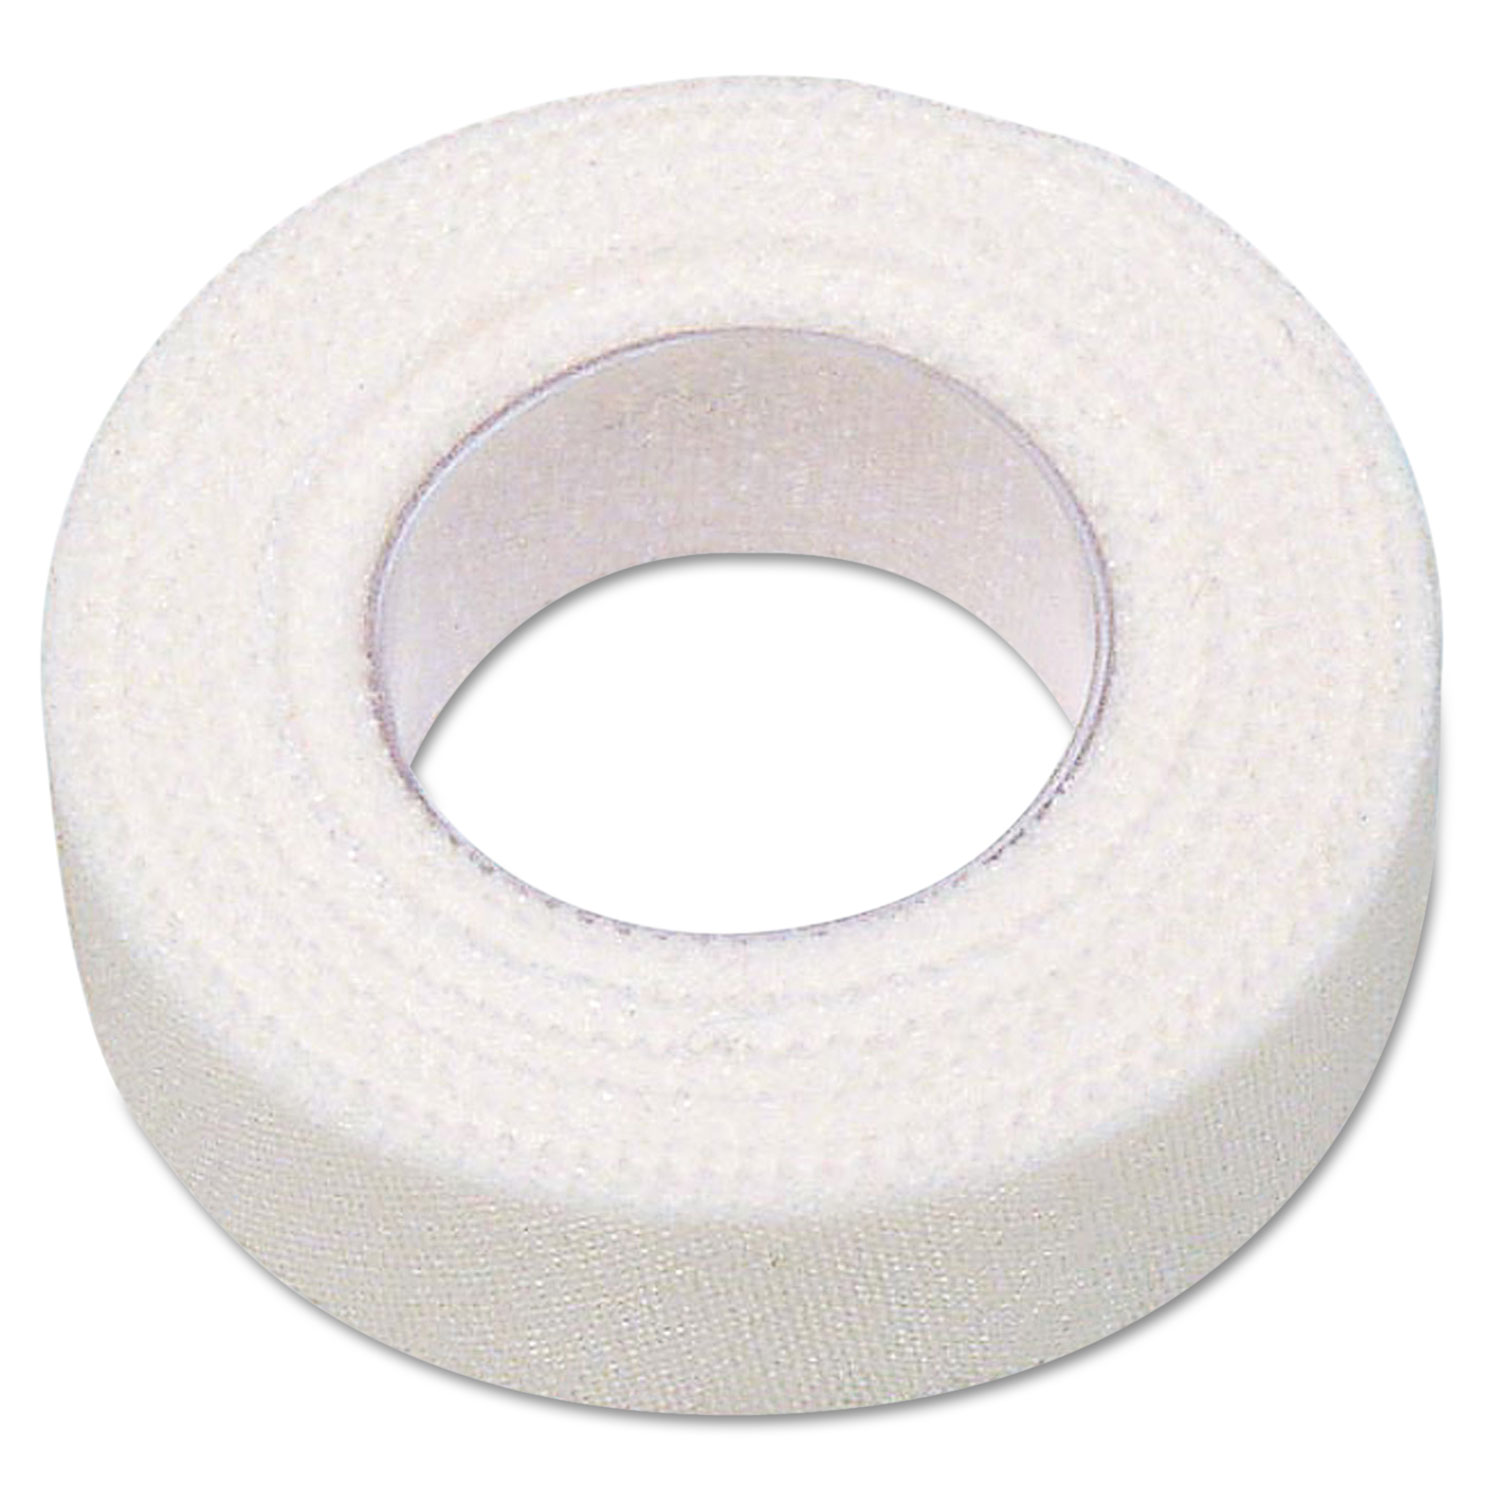  PhysiciansCare by First Aid Only 12302 First Aid Adhesive Tape, 1/2 x 10yds, 6 Rolls/Box (FAO12302) 